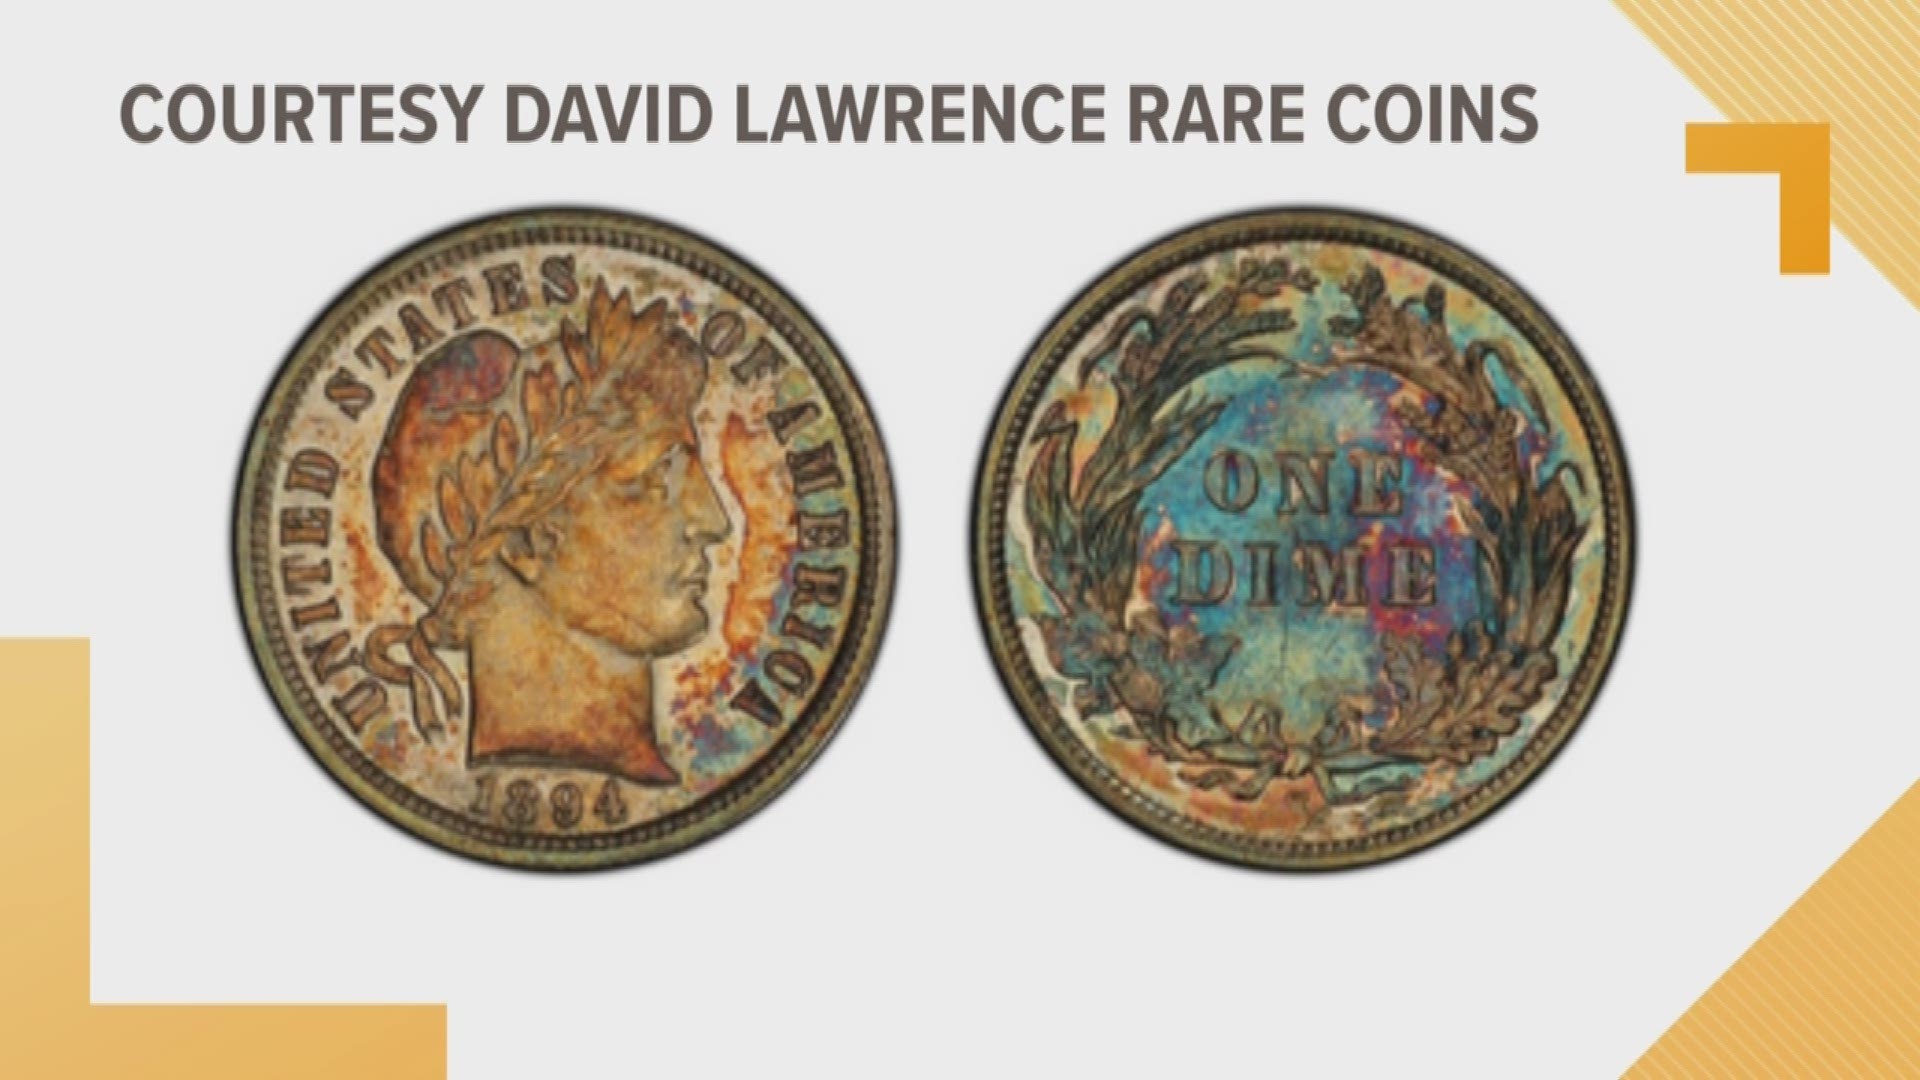 Virginia beach is now home to one of the rarest coins in the world. "David Lawrence Rare Coins" bought a 125-year-old silver dime was sold at auction in Chicago for $1.3 million.